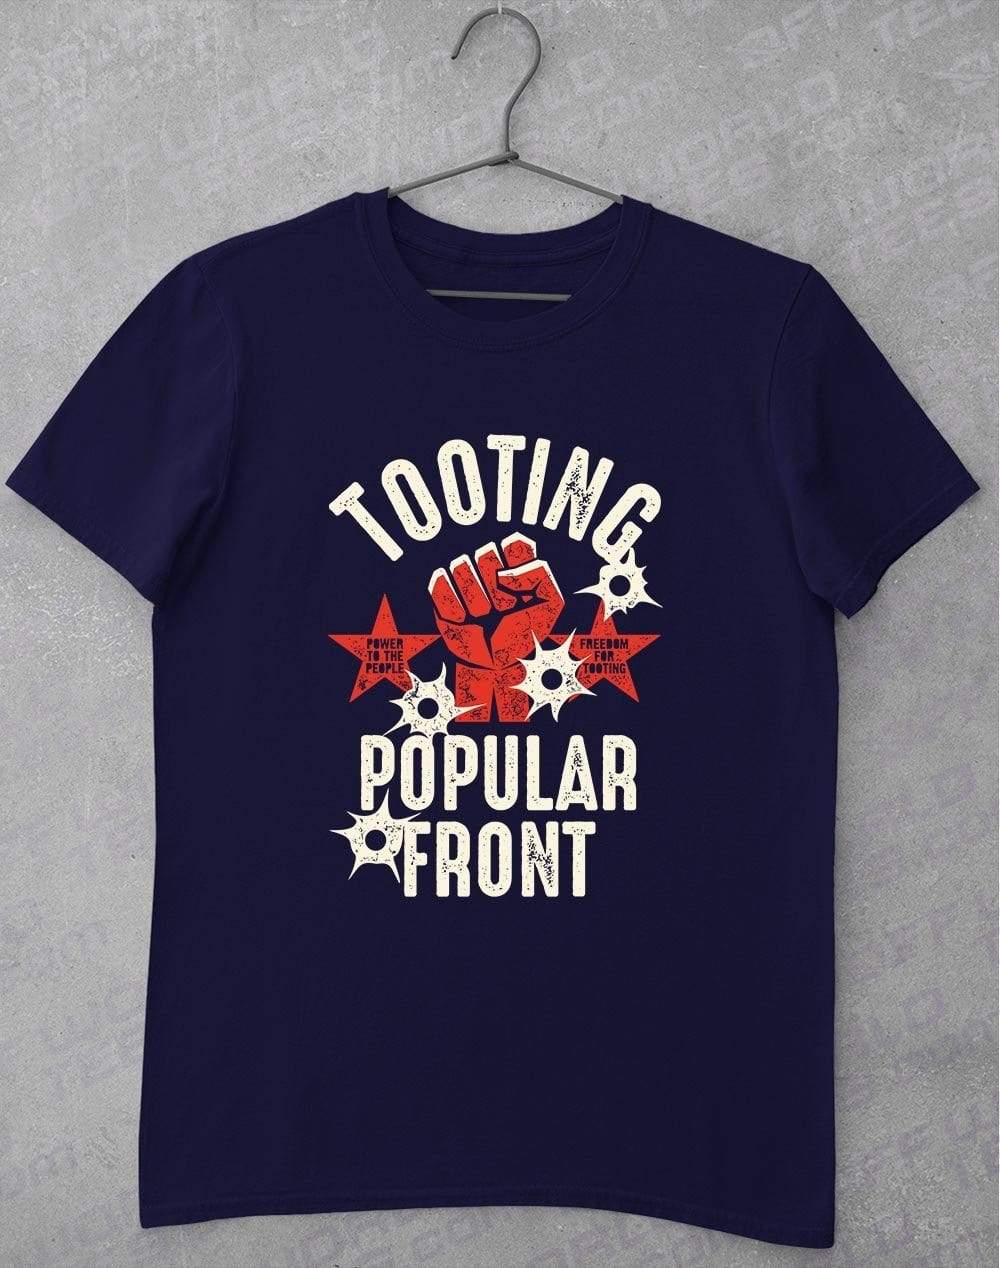 Tooting Popular Front T-Shirt S / Navy  - Off World Tees